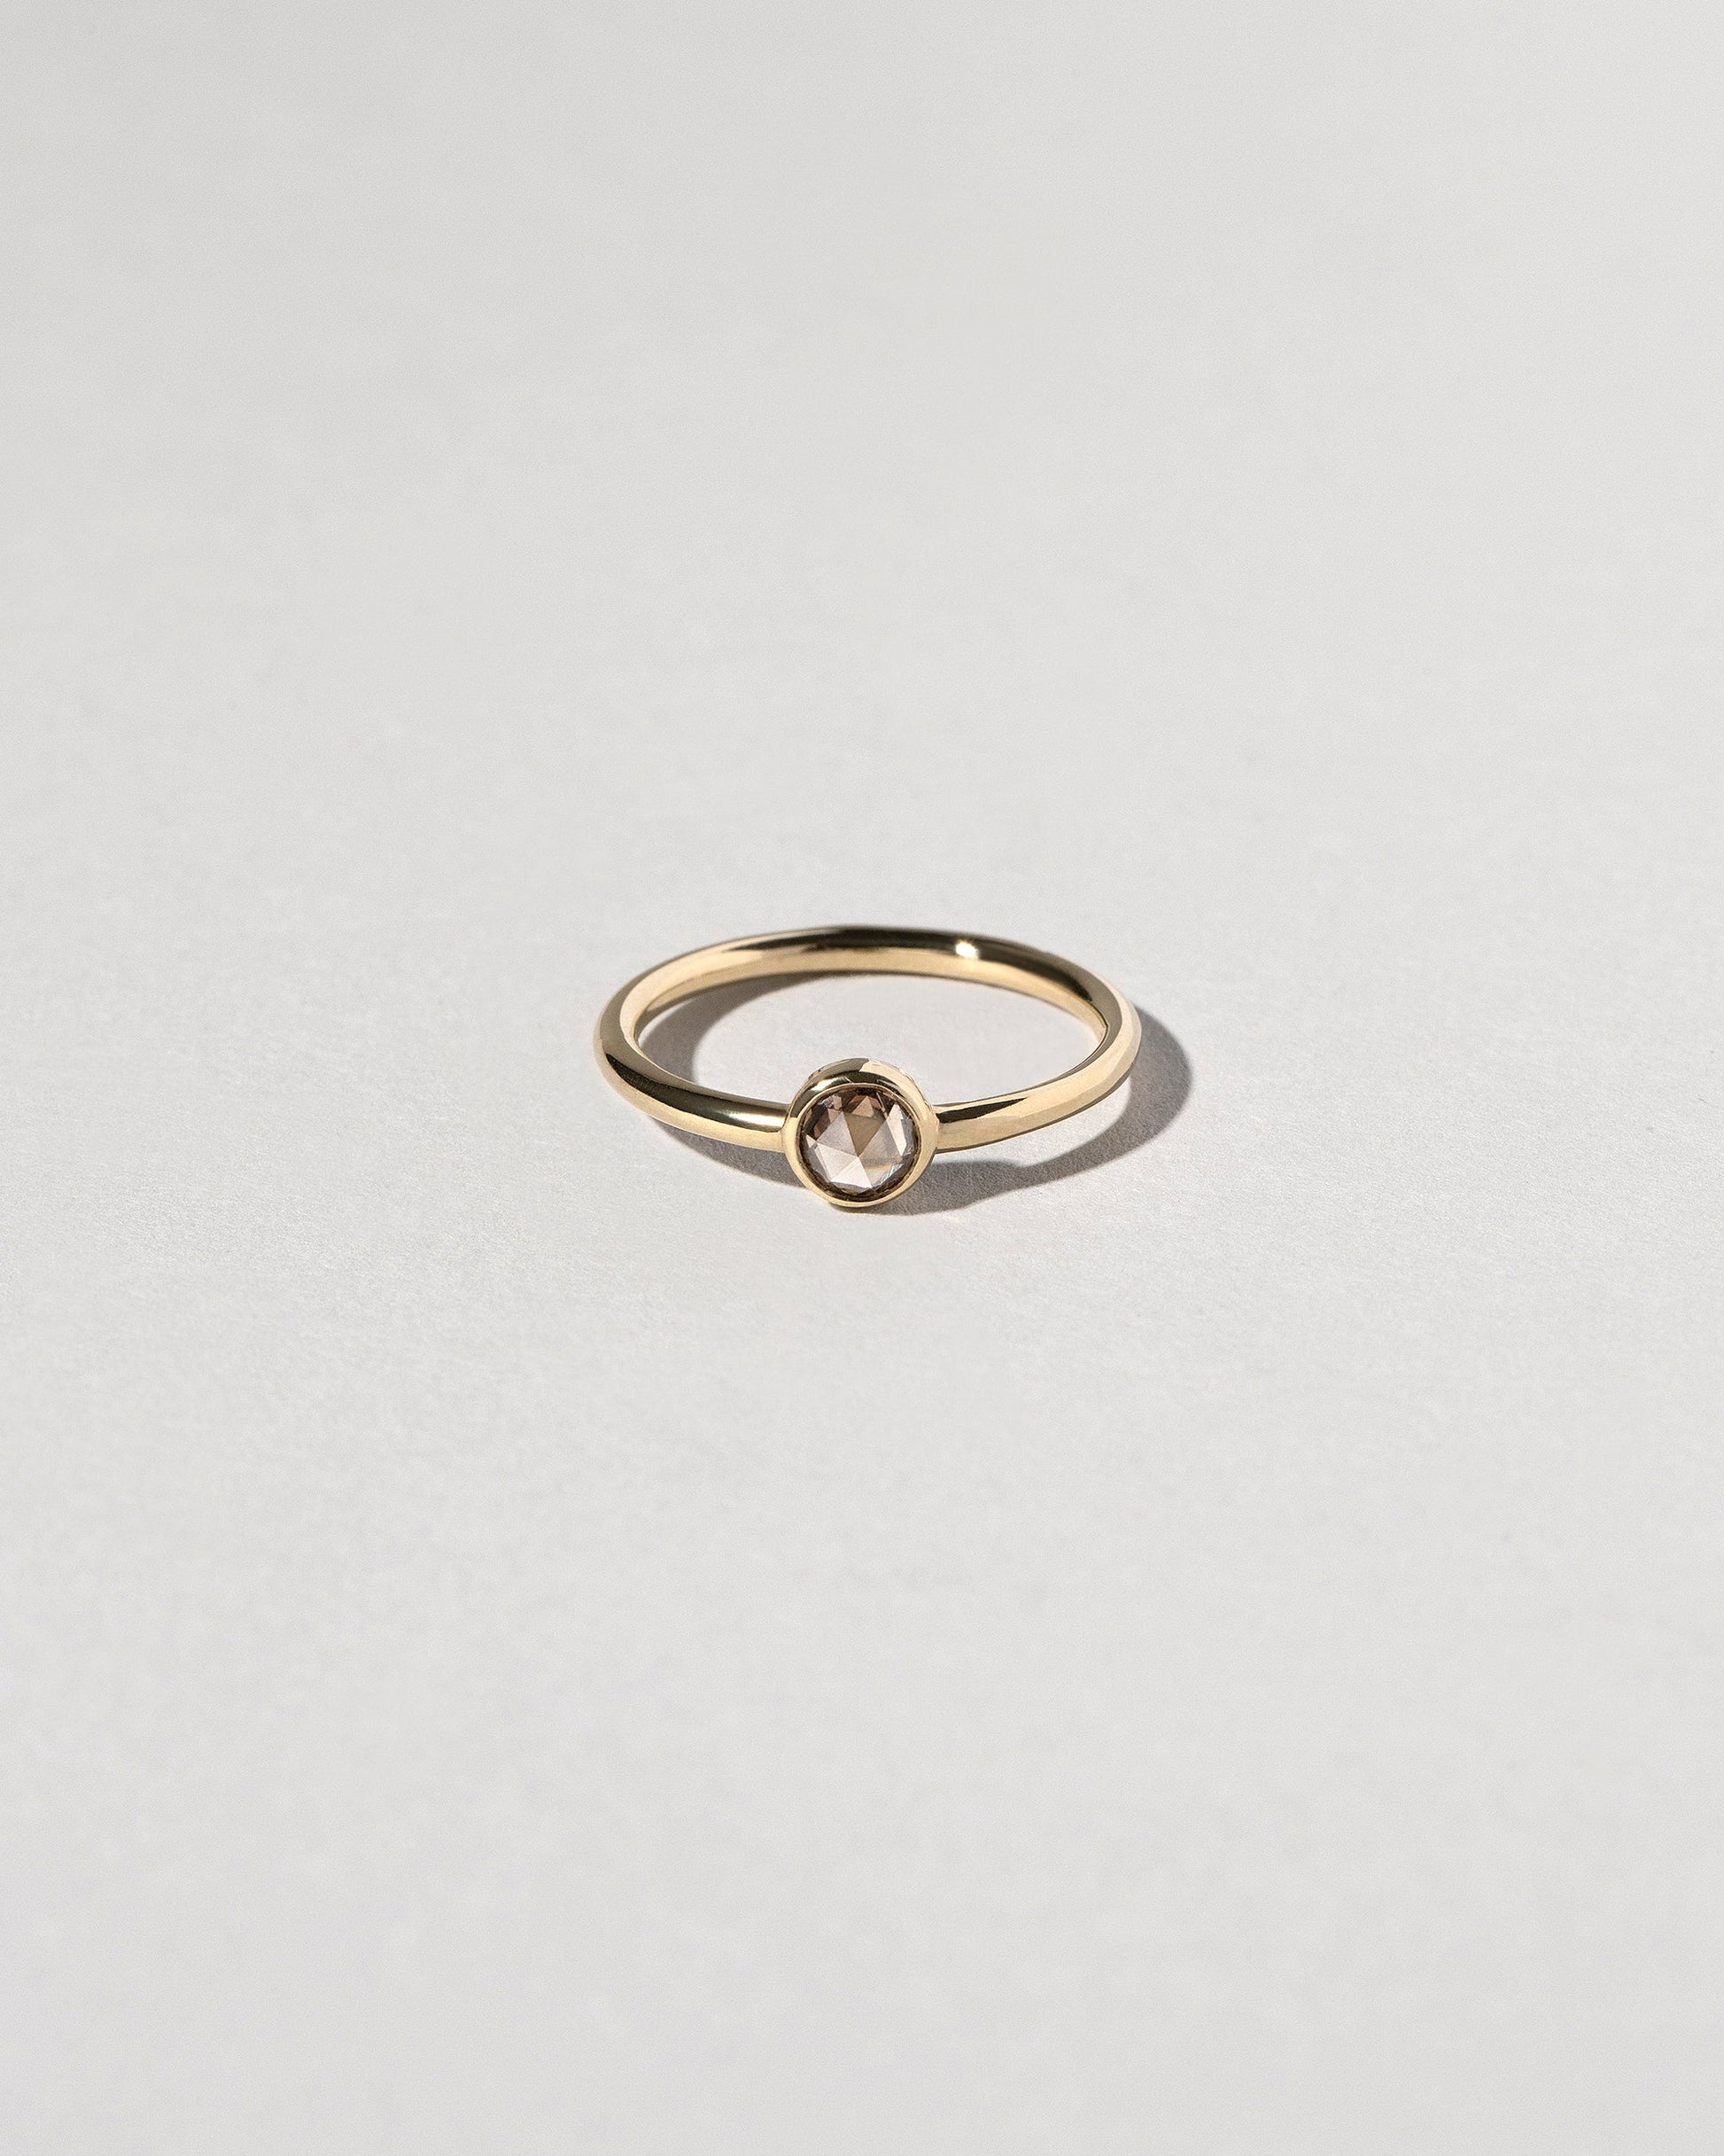  Rose Cut Champagne Diamond Ring on light color background.